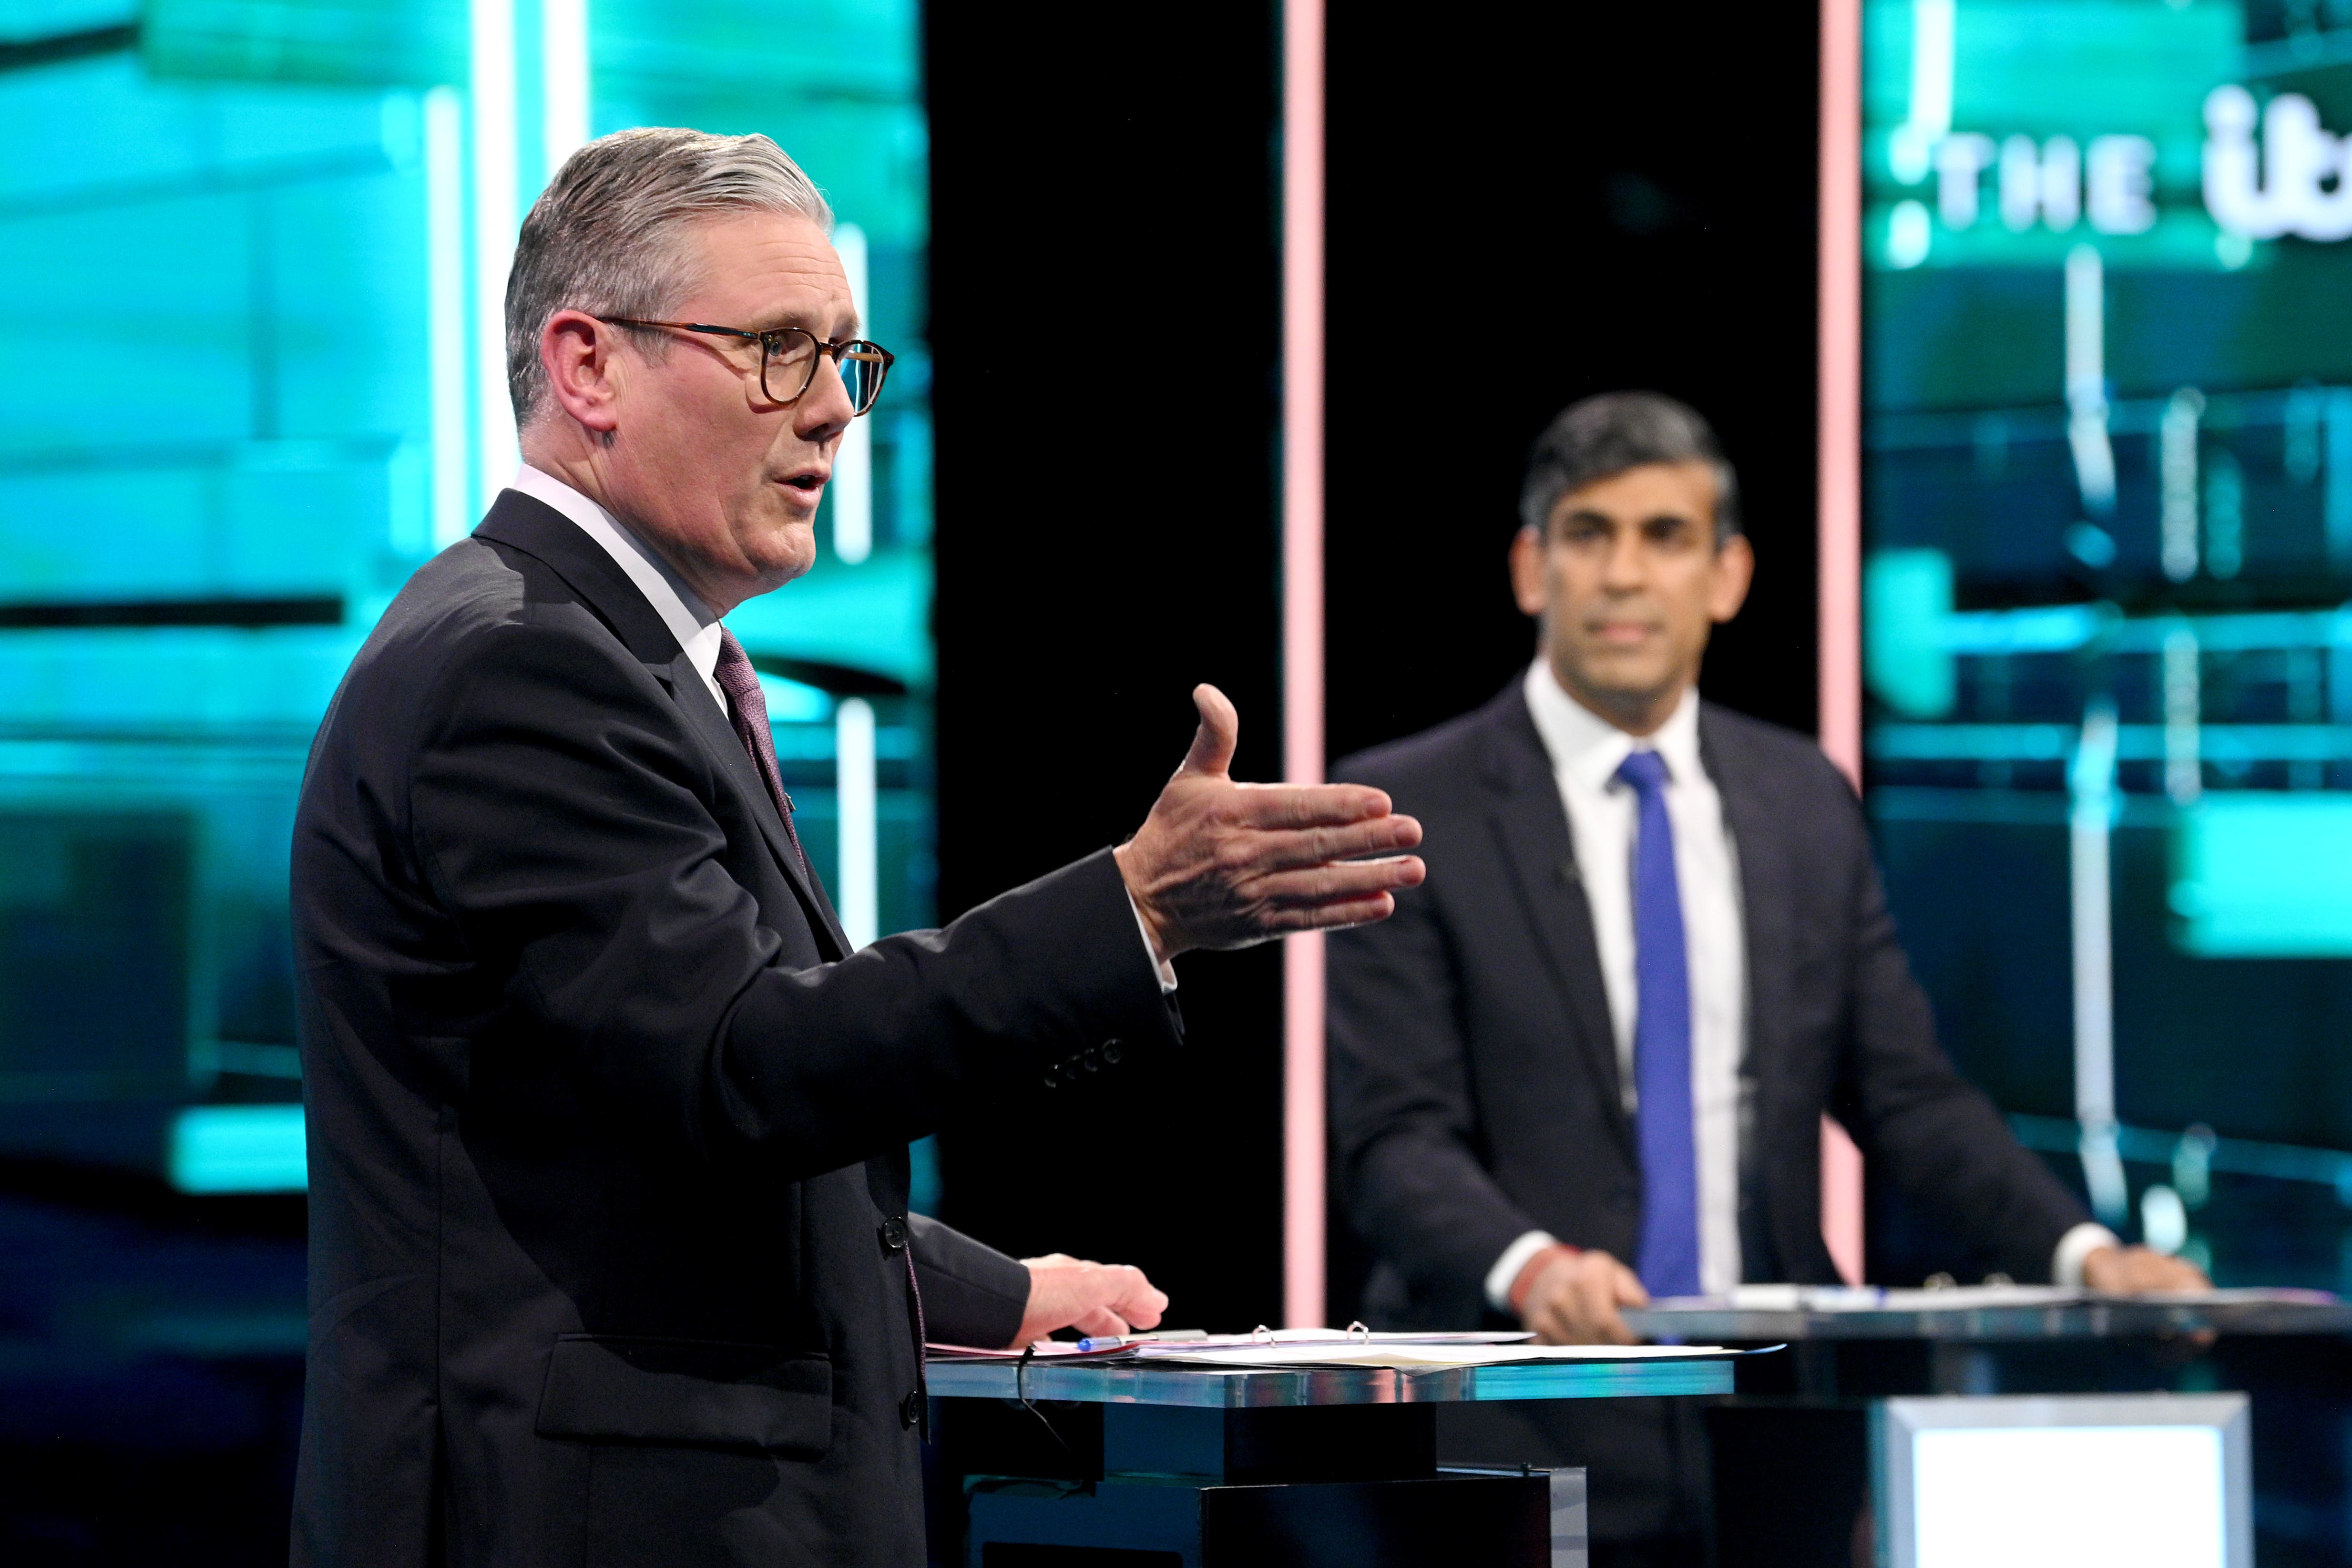 Prime Minister Rishi Sunak and Labour leader Sir Keir Starmer will go head to head to win voters over (Jonathan Hordle/ITV)